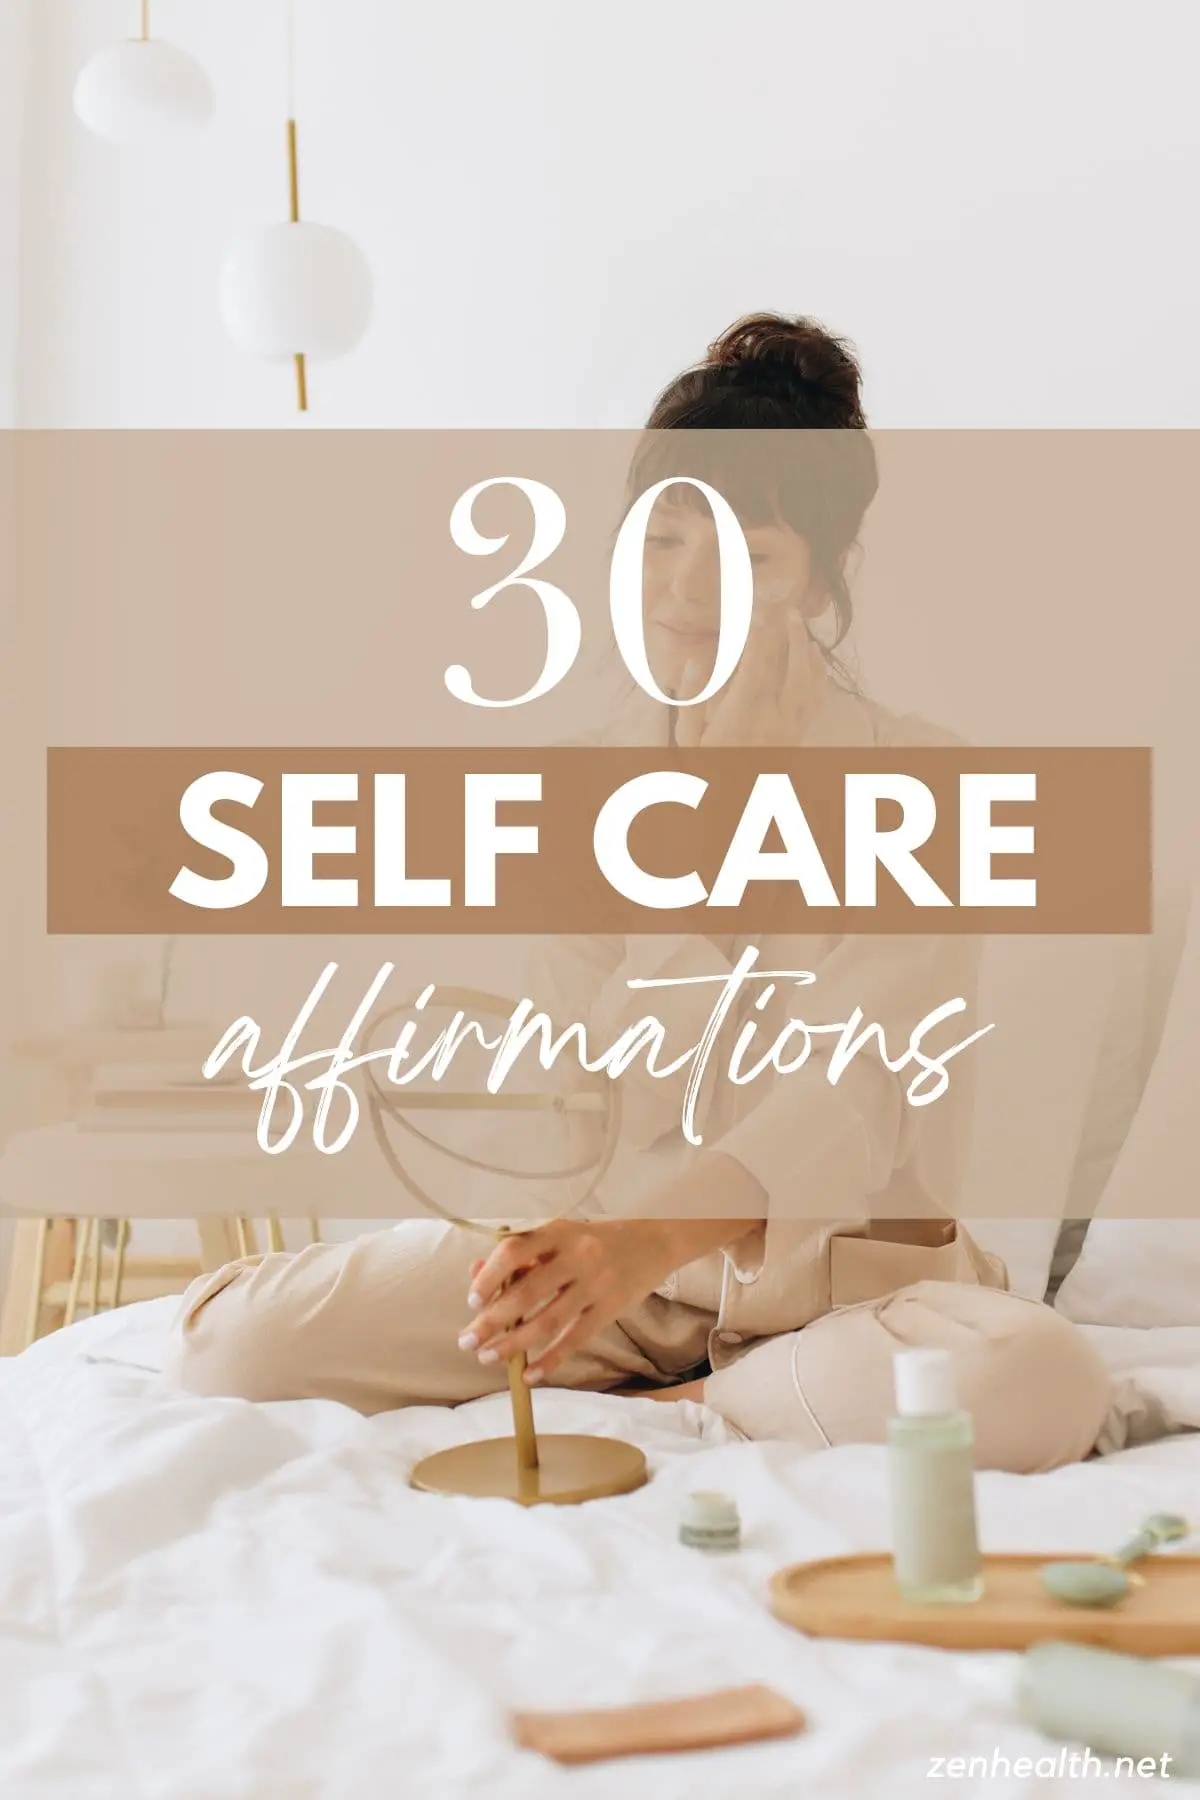 30 self care affirmations text overlay on a woman applying facial cream while holding a mirror and sitting on the bed